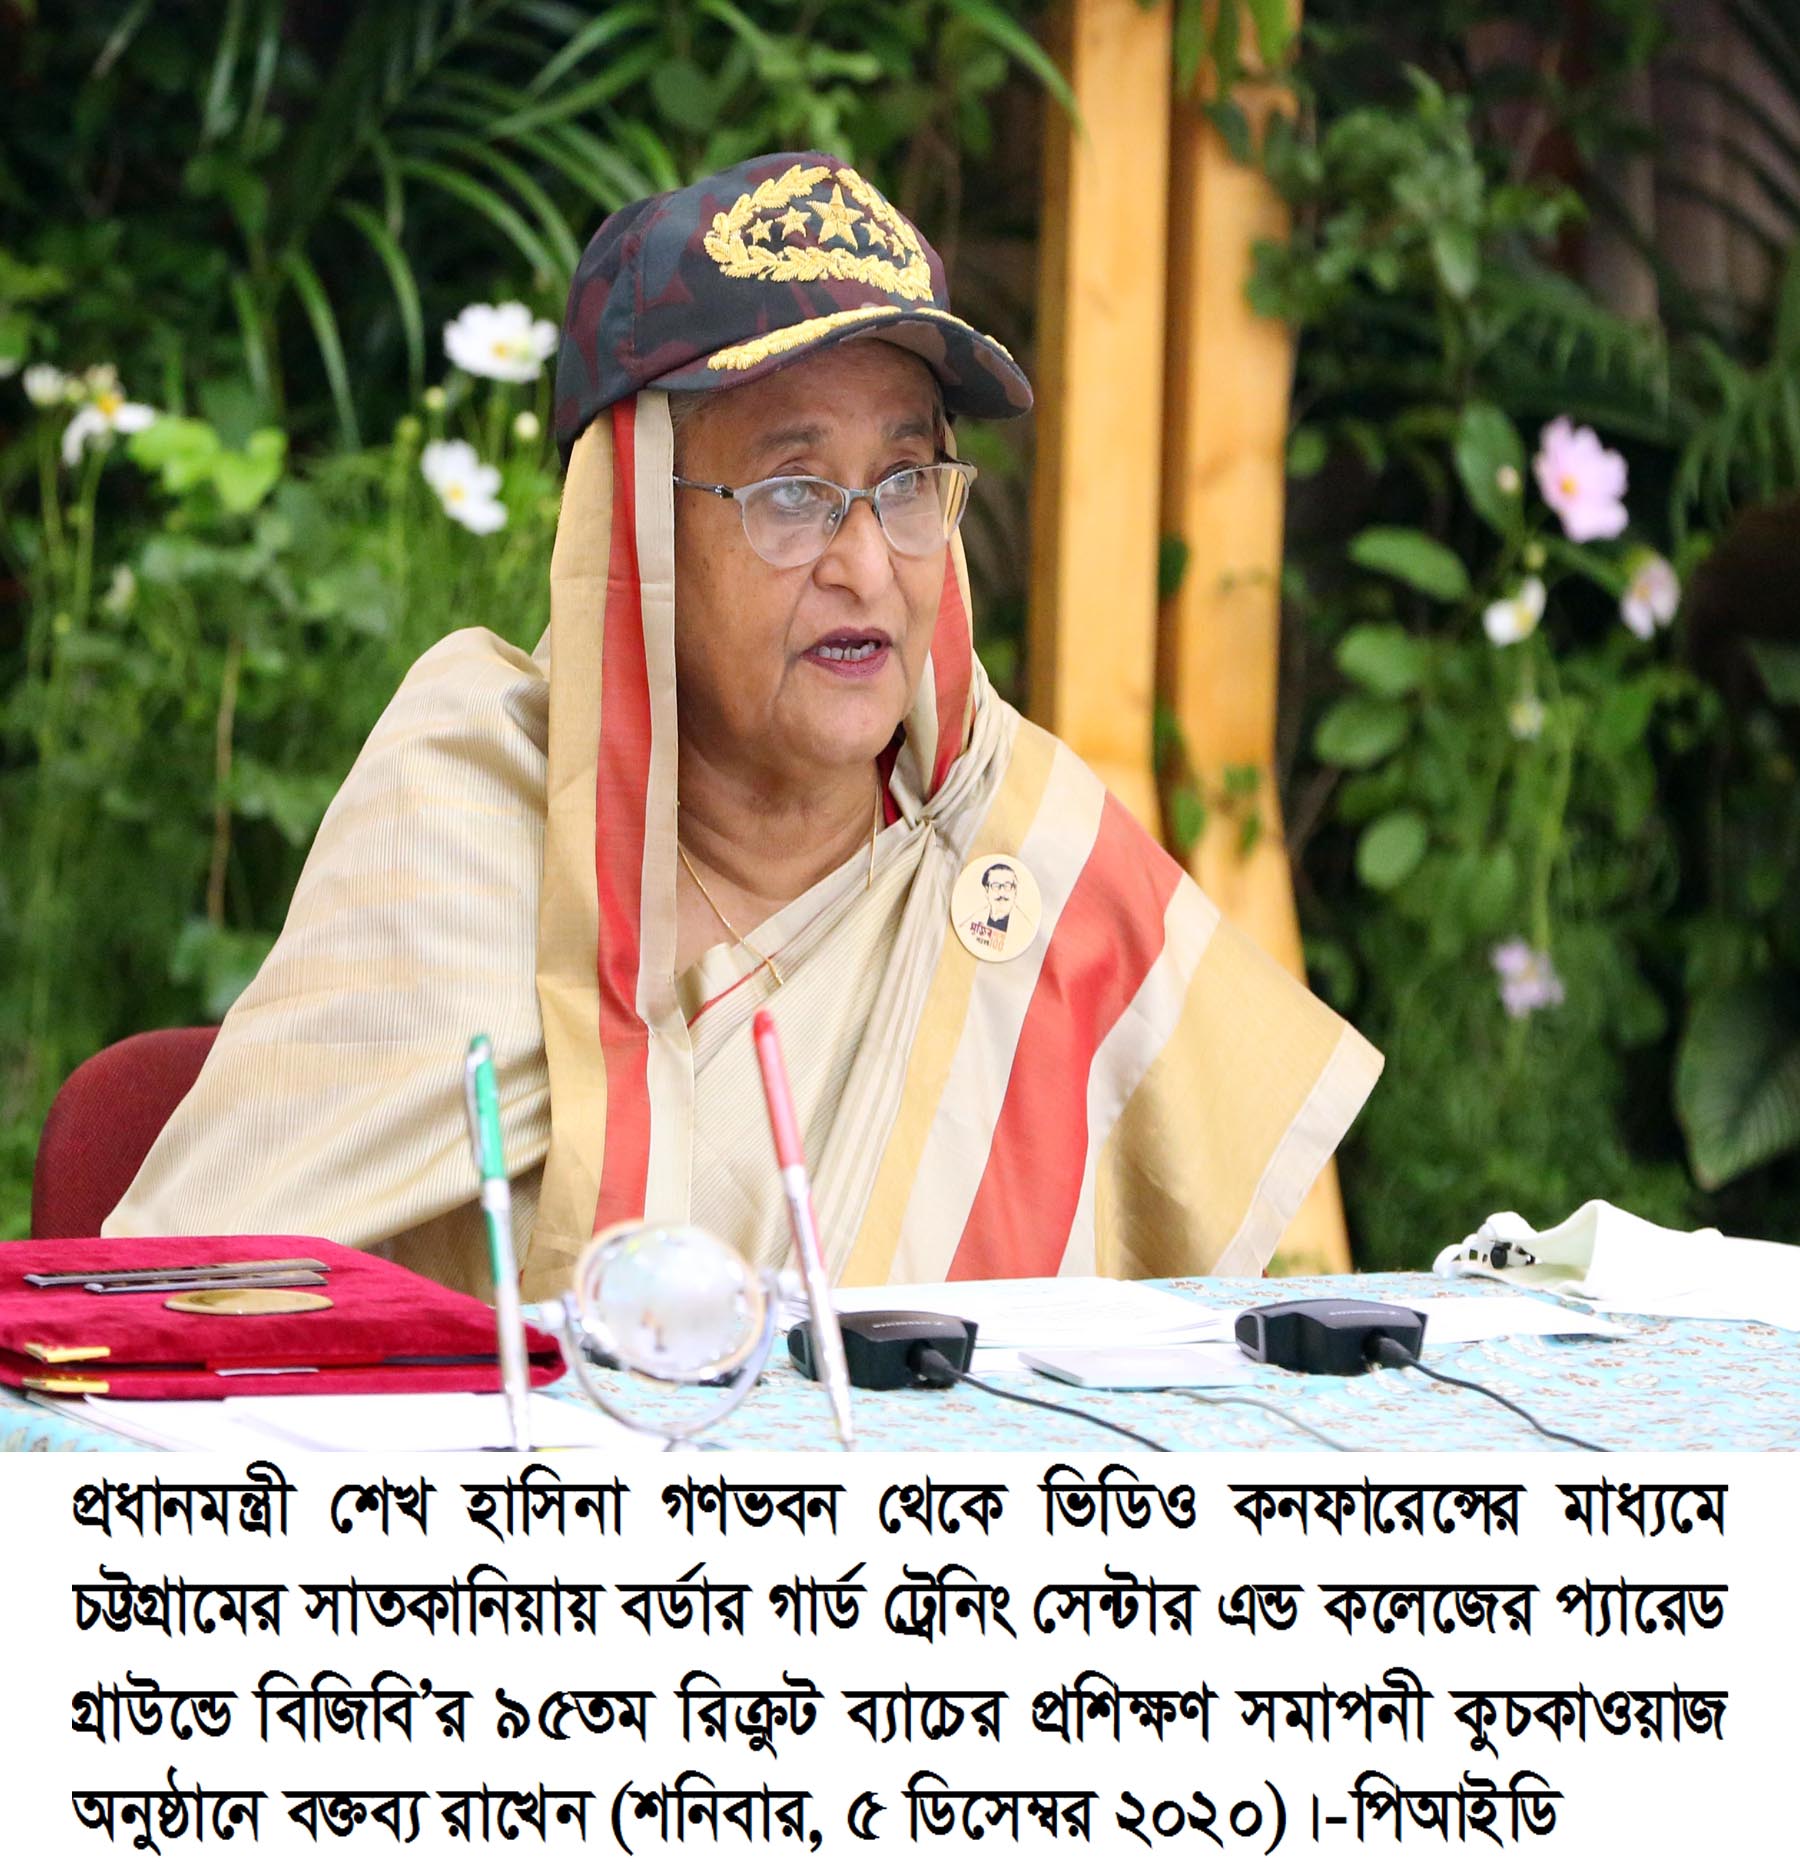 Sheikh Hasina attends programme via video conference